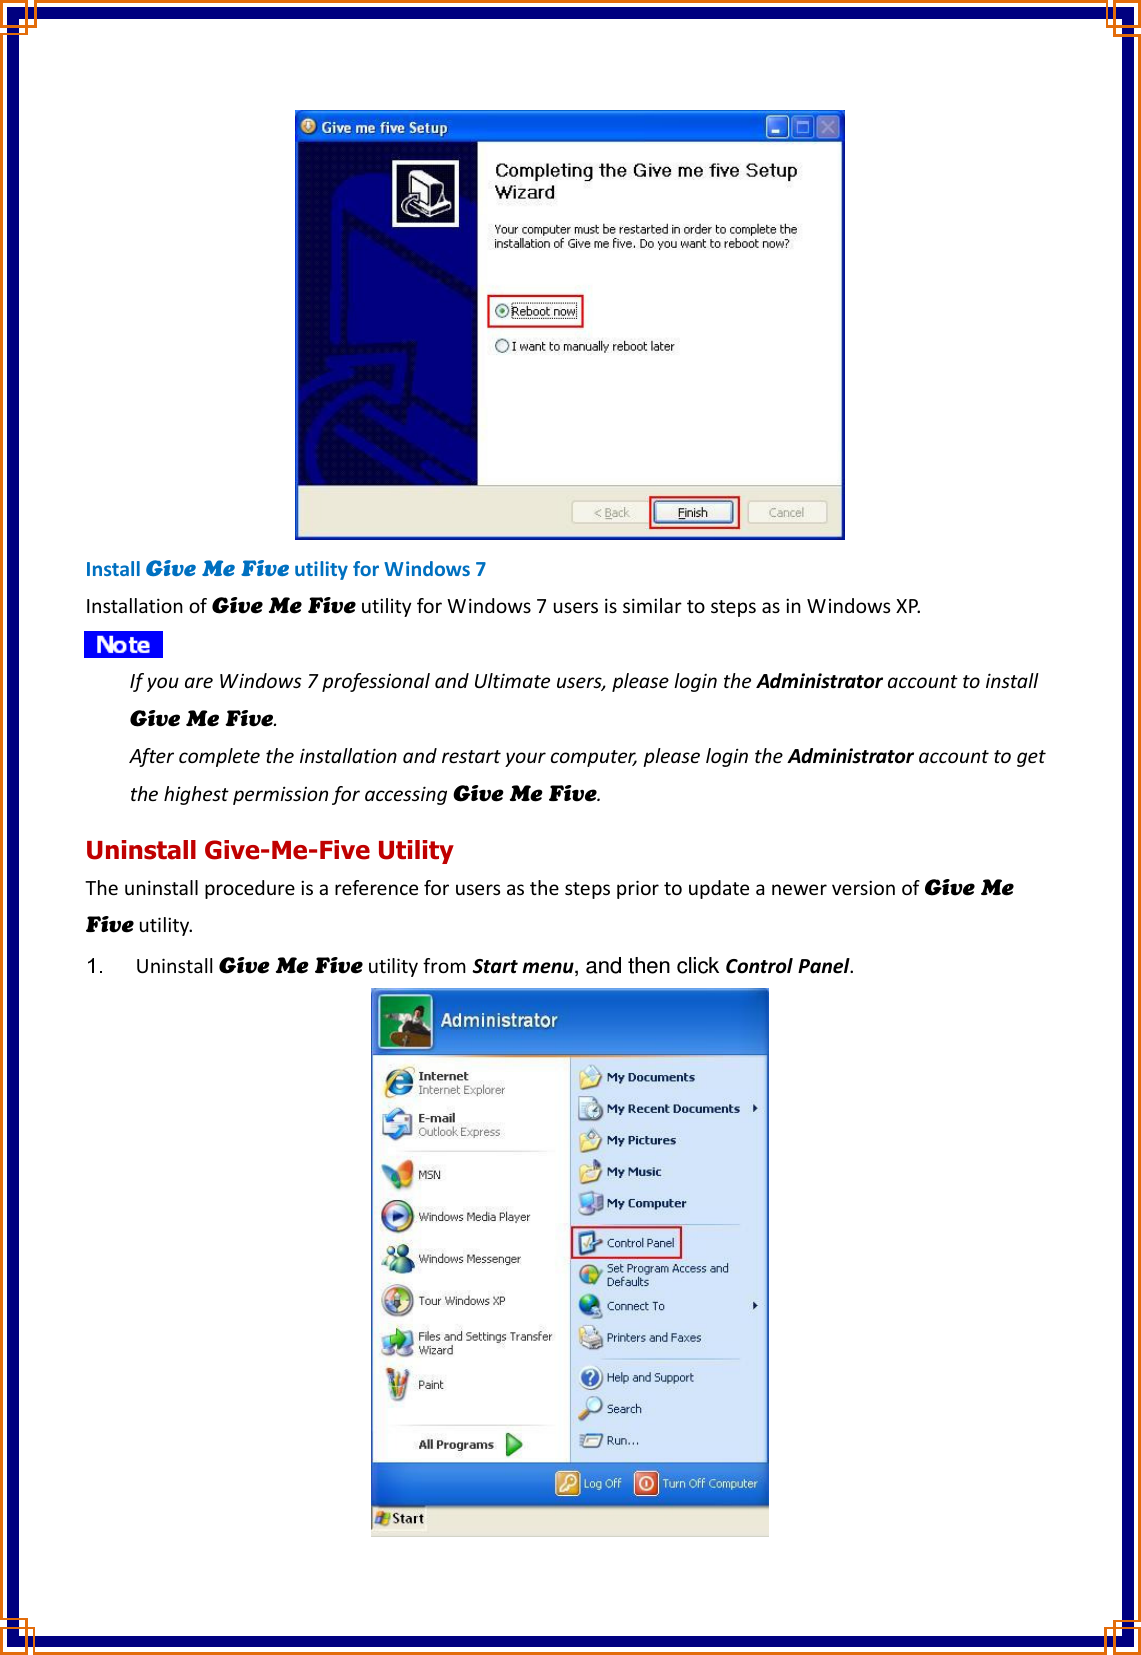  Install Give Me Five utility for Windows 7 Installation of Give Me Five utility for Windows 7 users is similar to steps as in Windows XP.    If you are Windows 7 professional and Ultimate users, please login the Administrator account to install Give Me Five. After complete the installation and restart your computer, please login the Administrator account to get the highest permission for accessing Give Me Five. Uninstall Give-Me-Five Utility The uninstall procedure is a reference for users as the steps prior to update a newer version of Give Me Five utility.  Uninstall Give Me Five utility from Start menu, and then click Control Panel. 